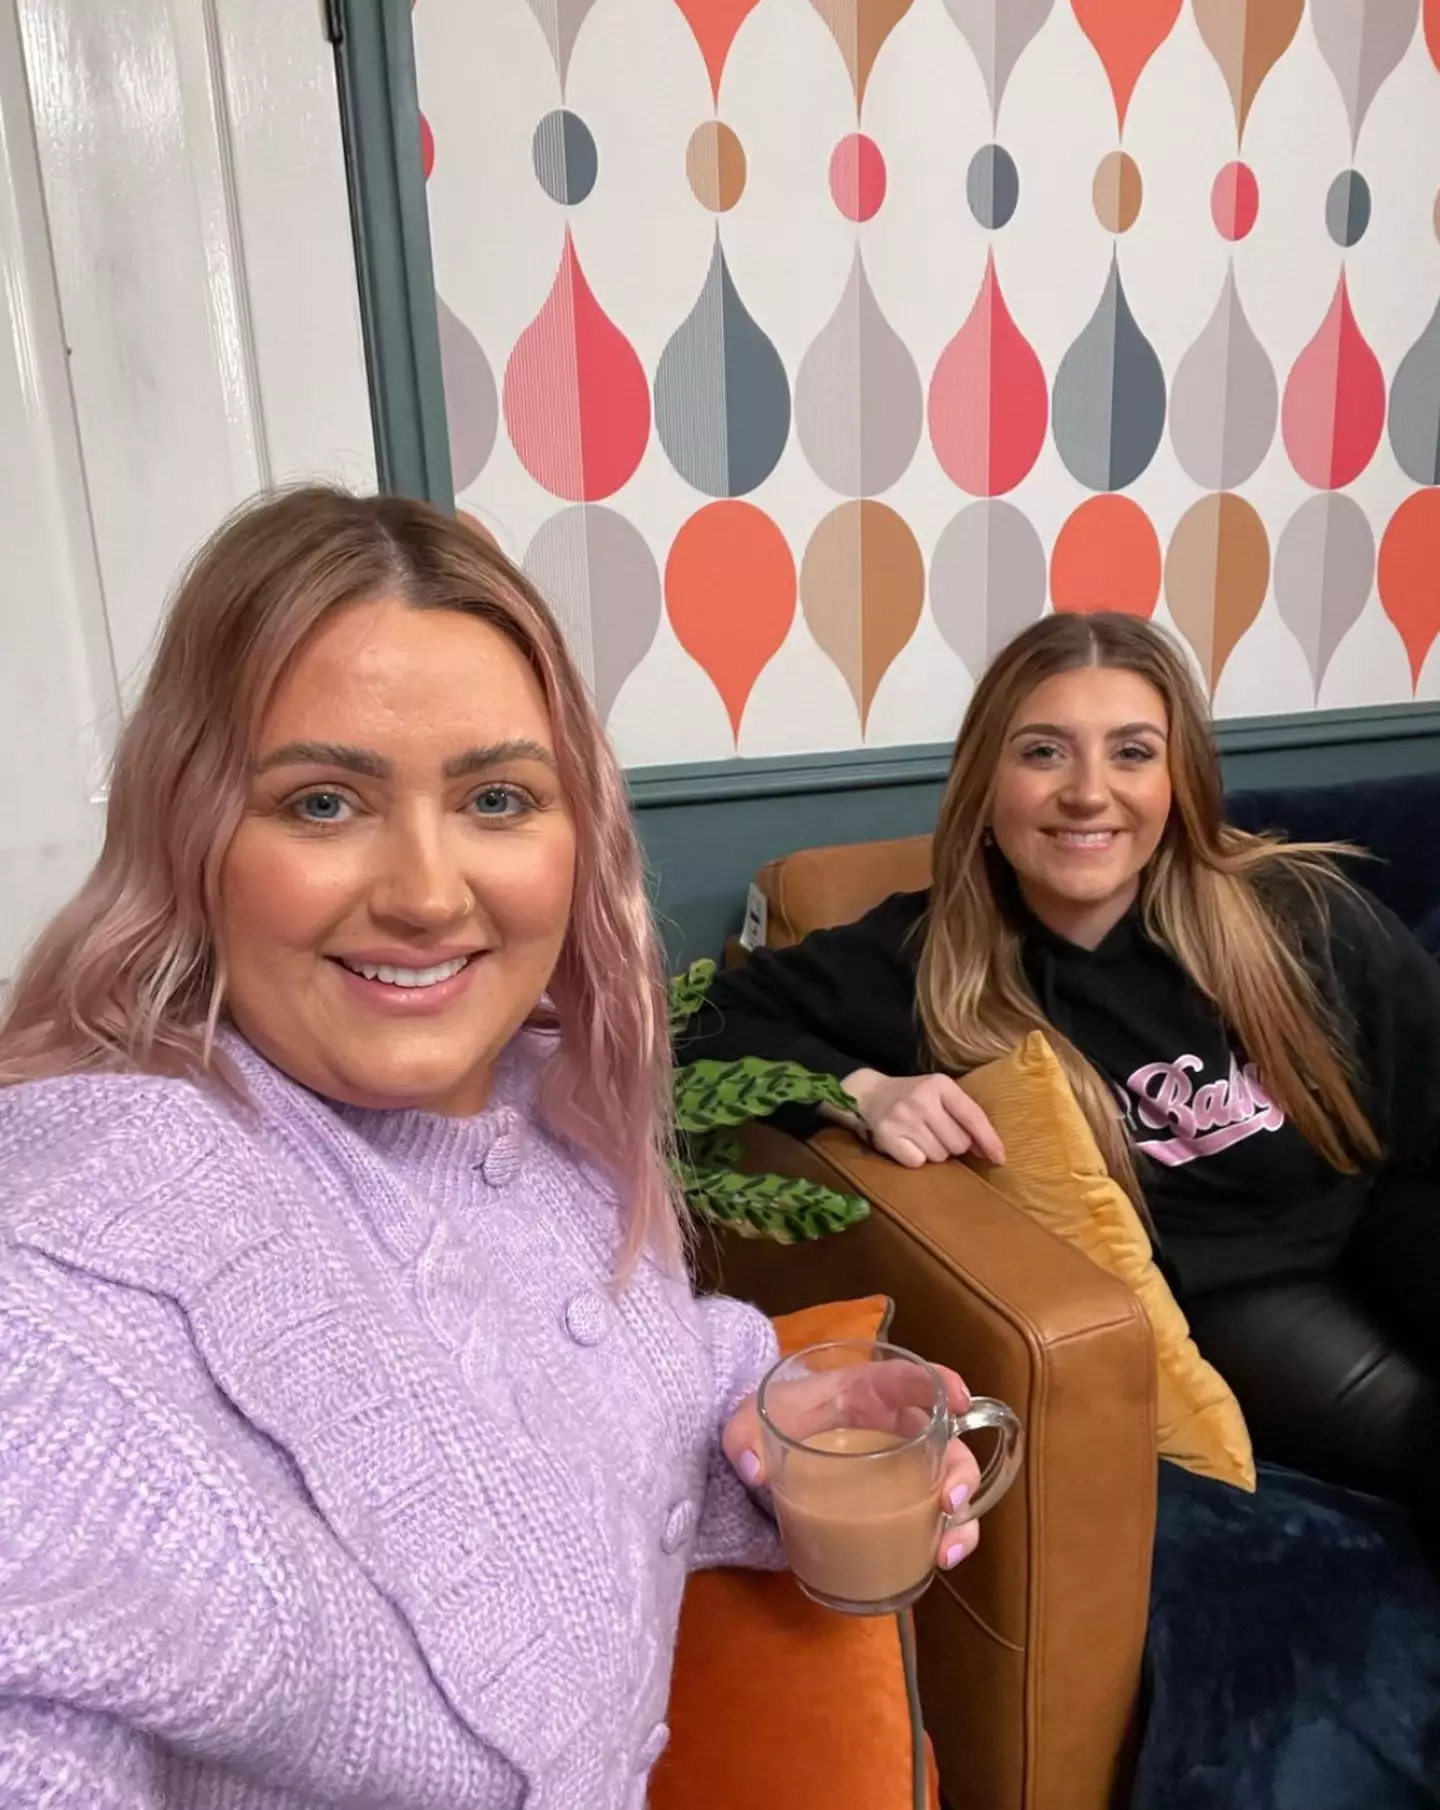 Ellie and her sister Izzie are two of the stars of Channel 4's Gogglebox. (